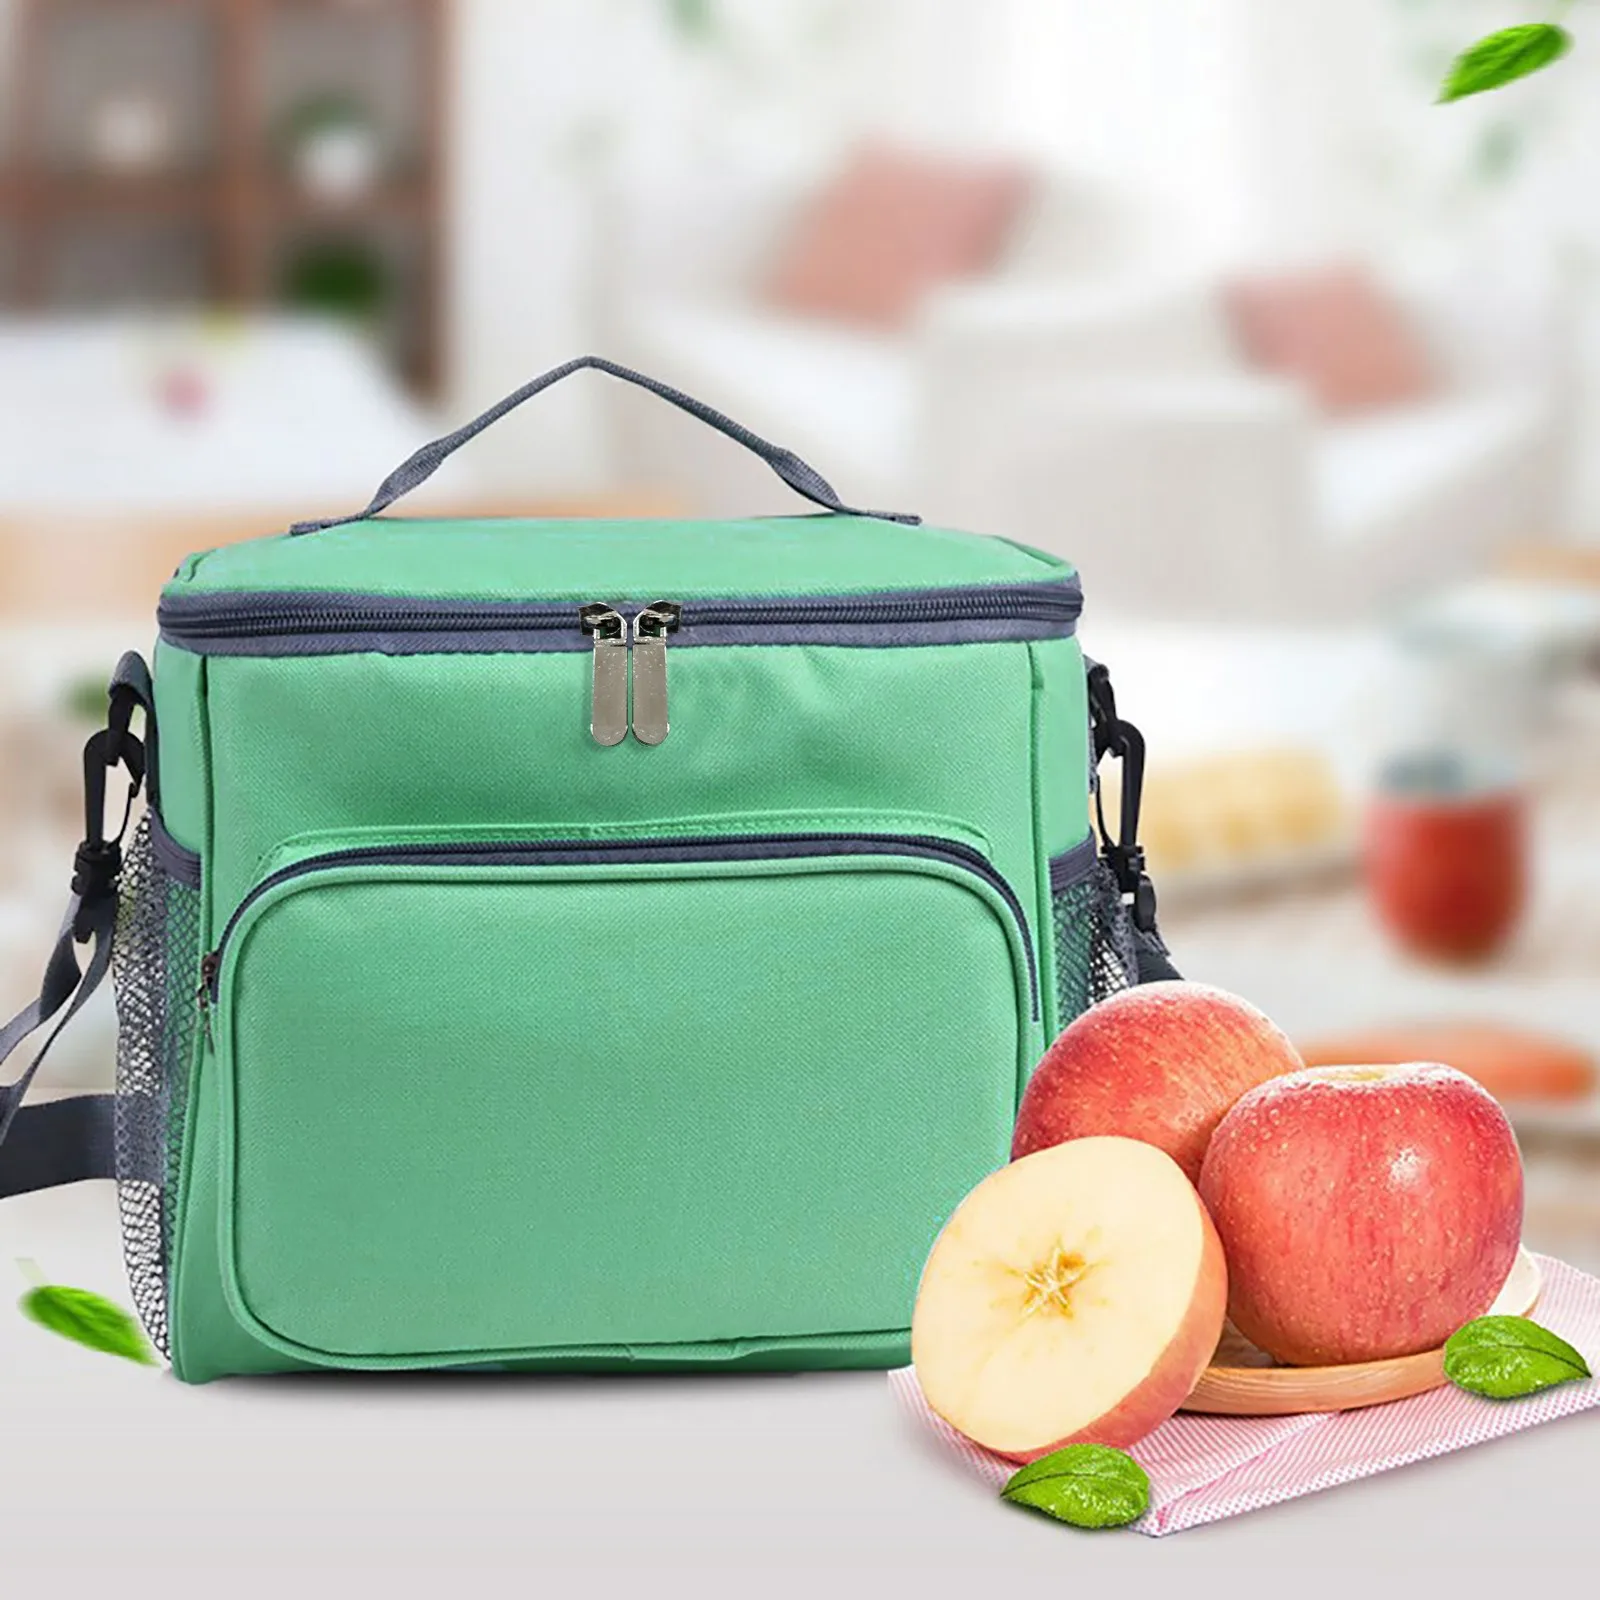 Thermal Lunch Bag Women Portable Insulated Cooler Bento Tote Family Travel Picnic Drink Fruit Food Fresh Organizer Accessories 